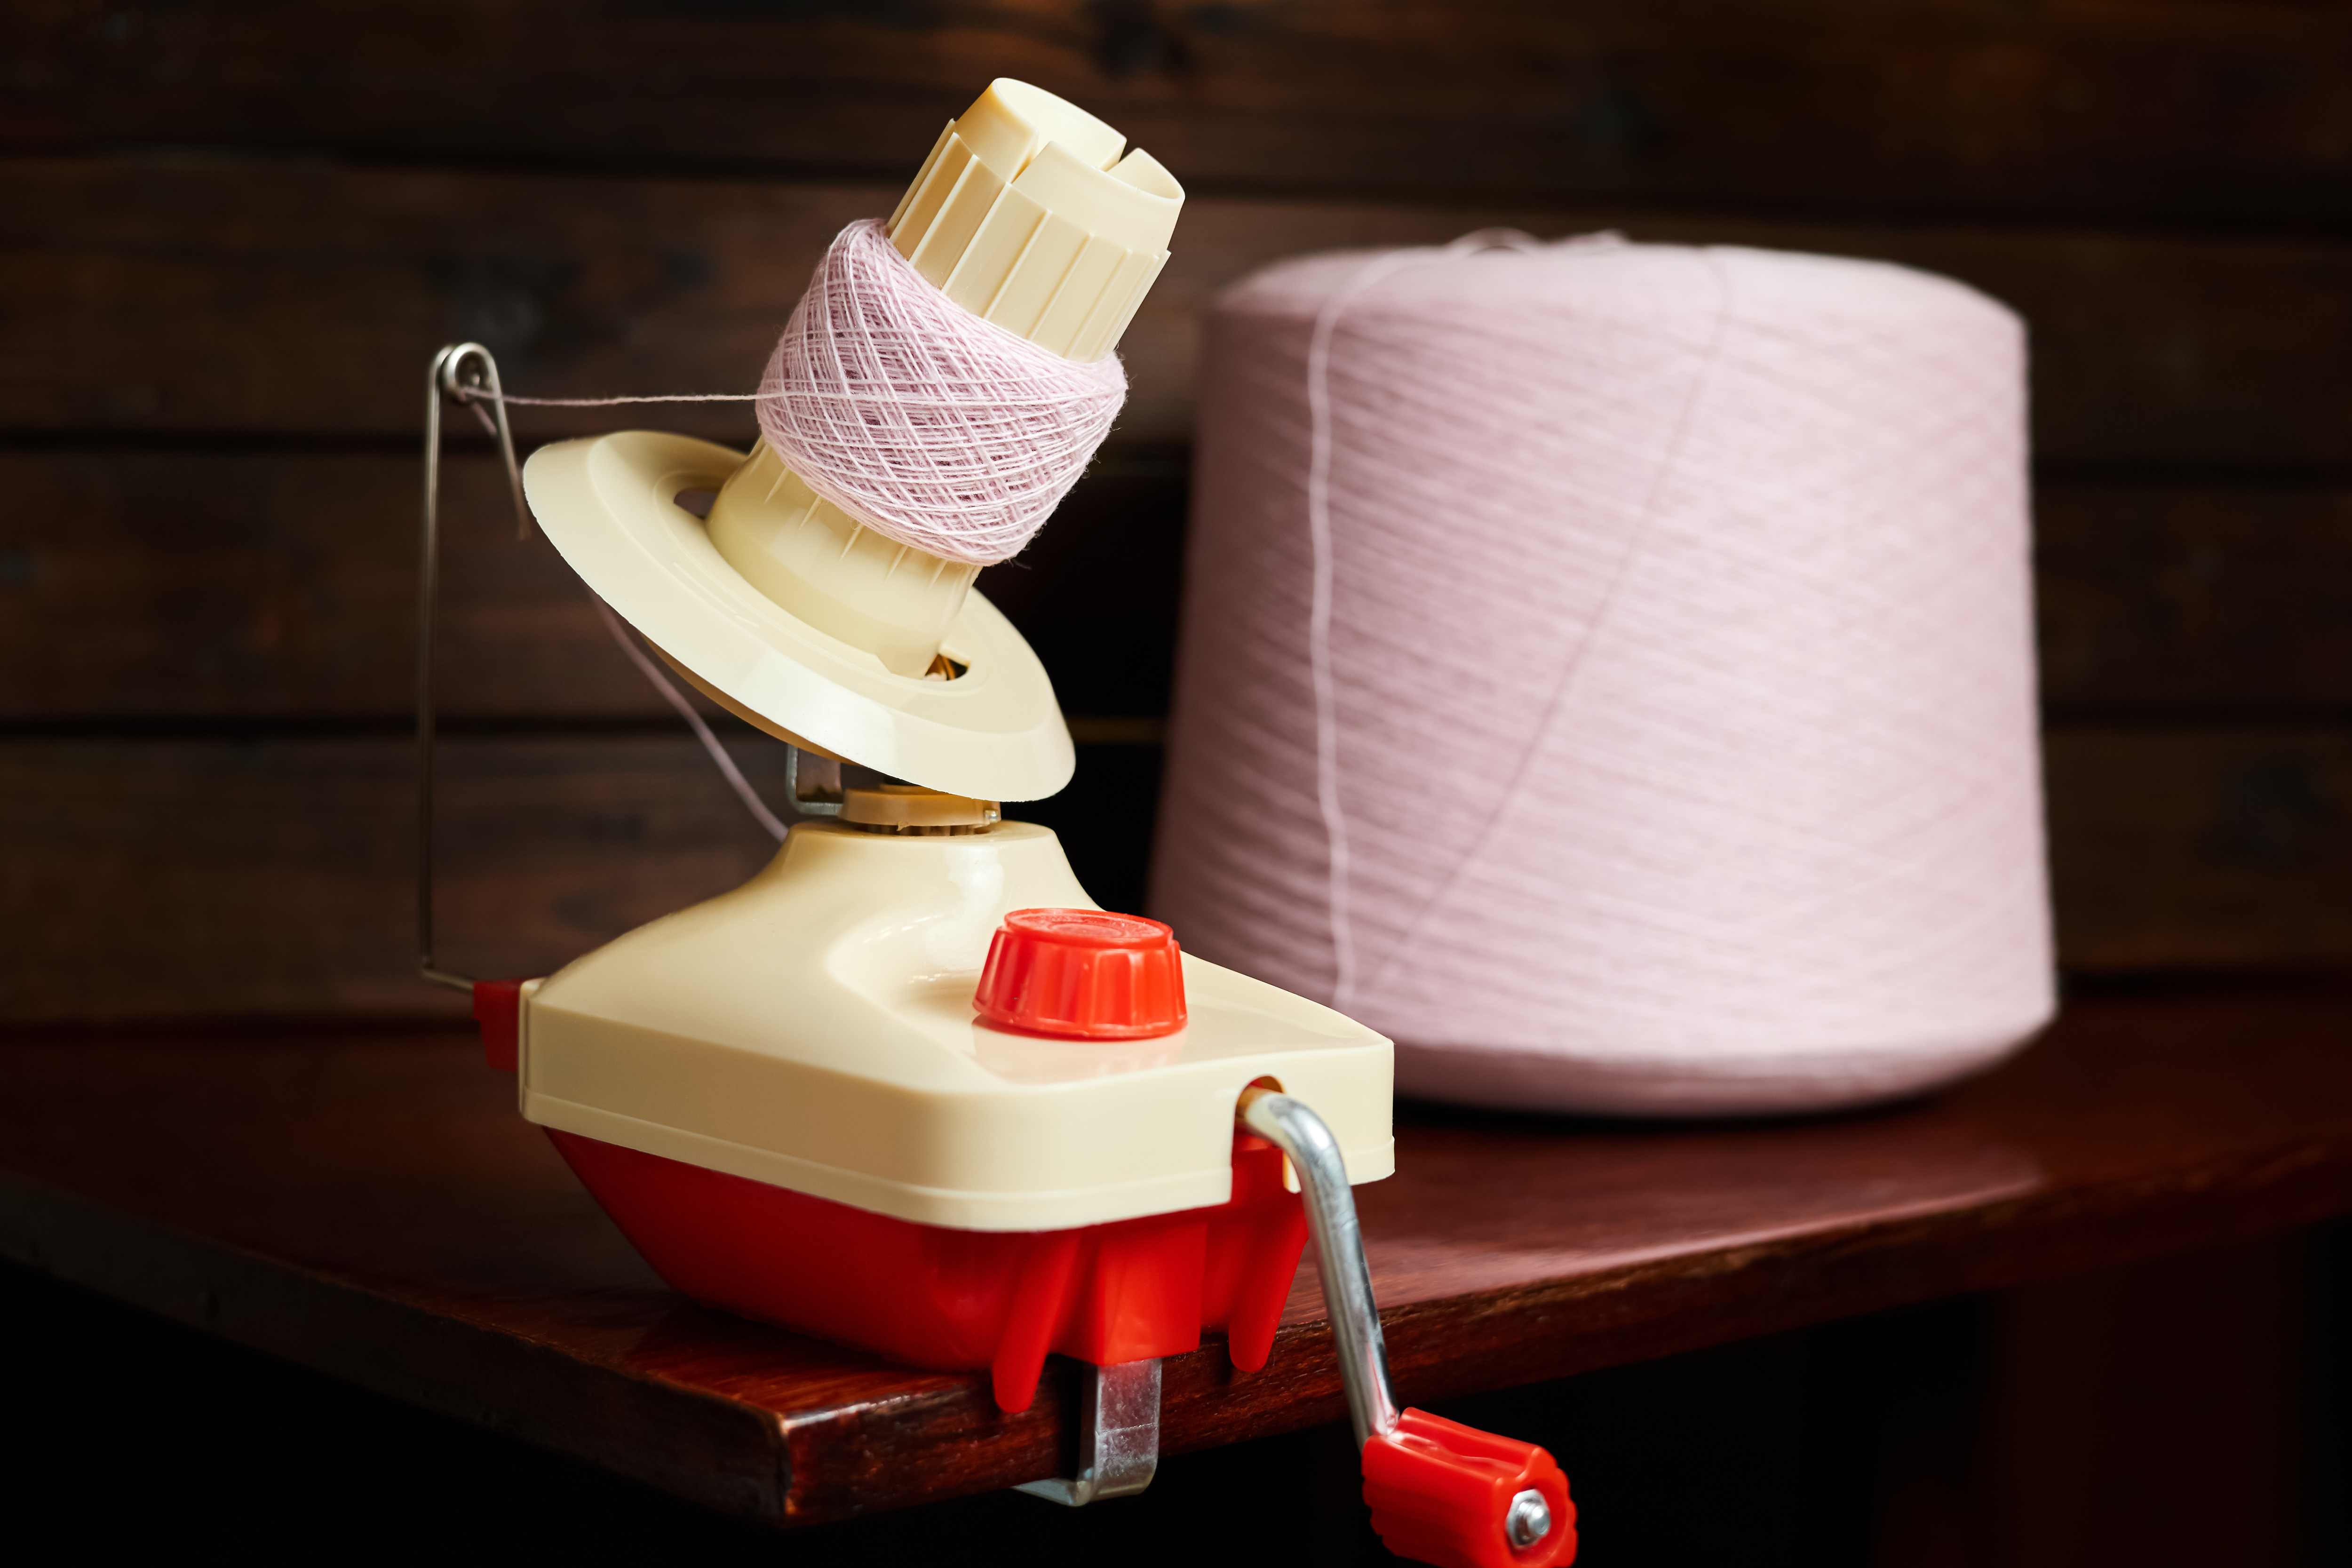 YARN WINDER  Do You Need One? How To Use? Price? Where to